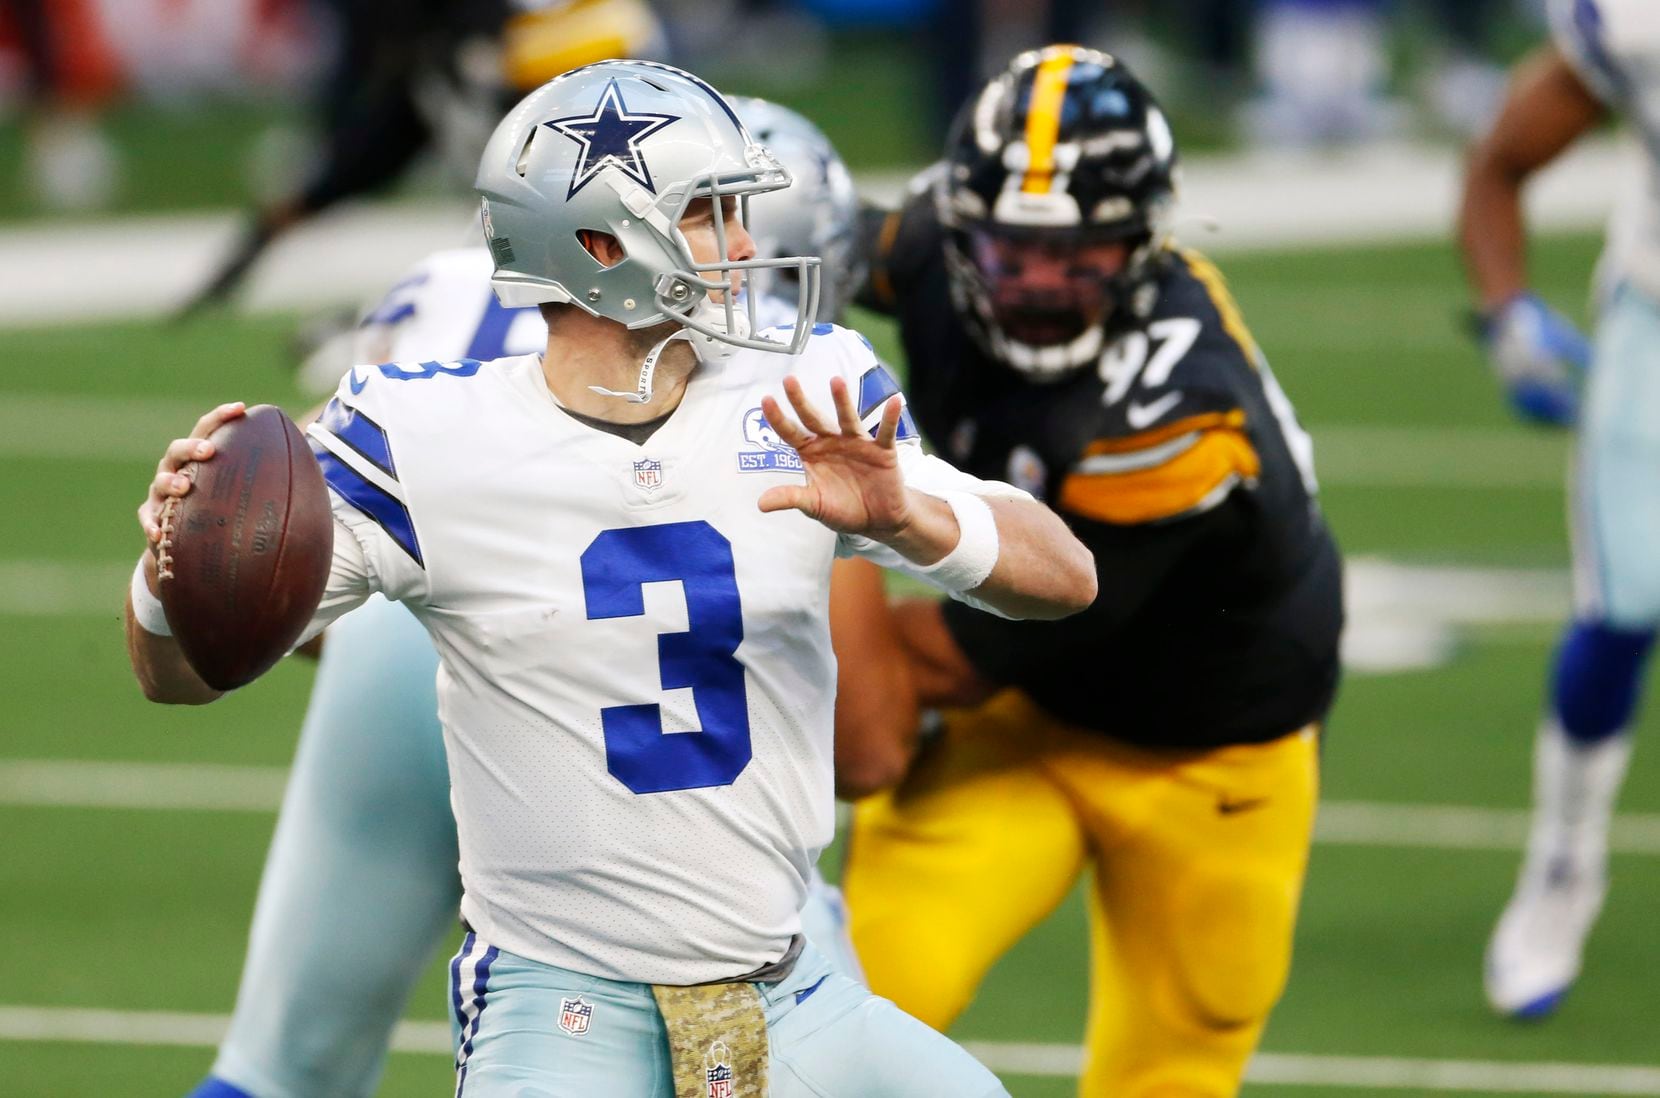 Dallas Cowboys quarterback Garrett Gilbert (3) attempts a pass in a game against the Pittsburgh Steelers during the first quarter of play at AT&T Stadium in Arlington, Texas on Sunday, November 8, 2020. (Vernon Bryant/The Dallas Morning News)